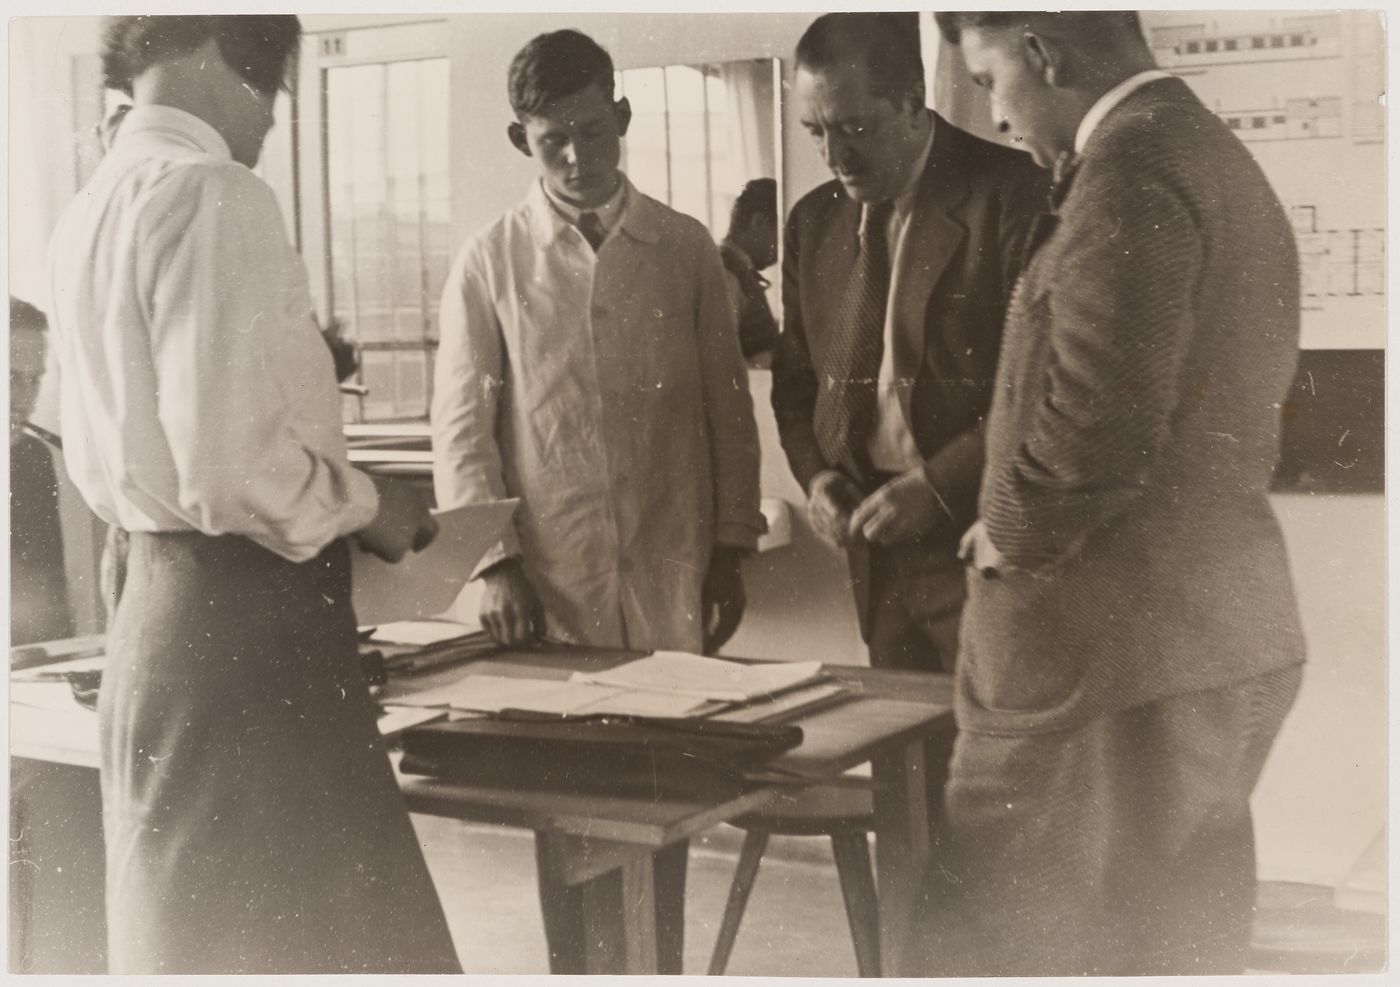 Mies van der Rohe conducting a seminar at the Bauhaus with students Annemarie Wilke, Heinrich Neuy and Herman Klumpp, Dessau, Germany